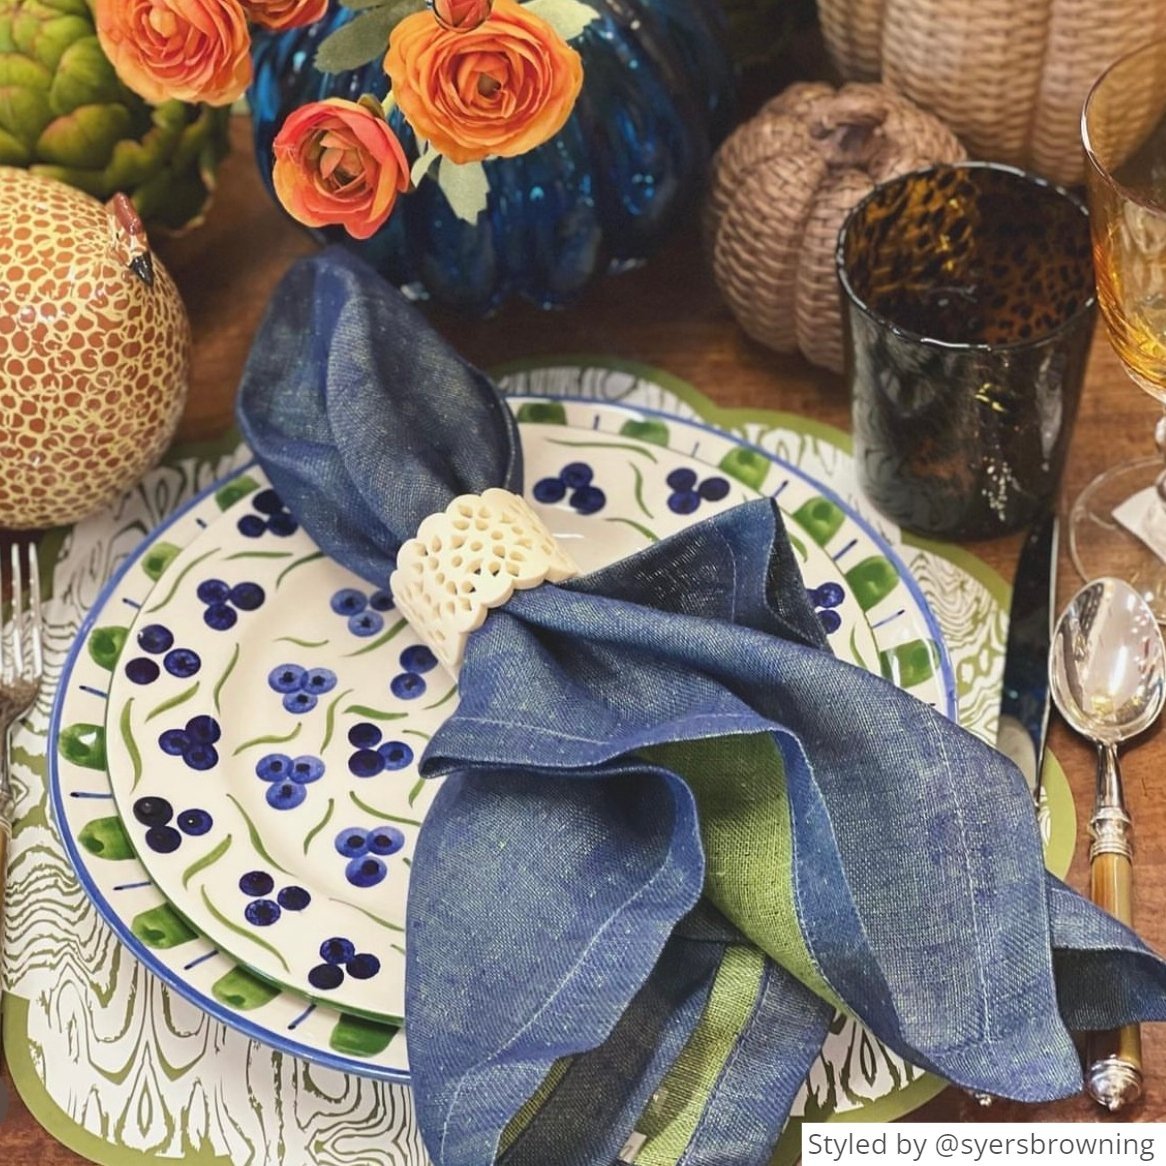 Green wood paper placemat layered with green and white plates and a blue denim napkin